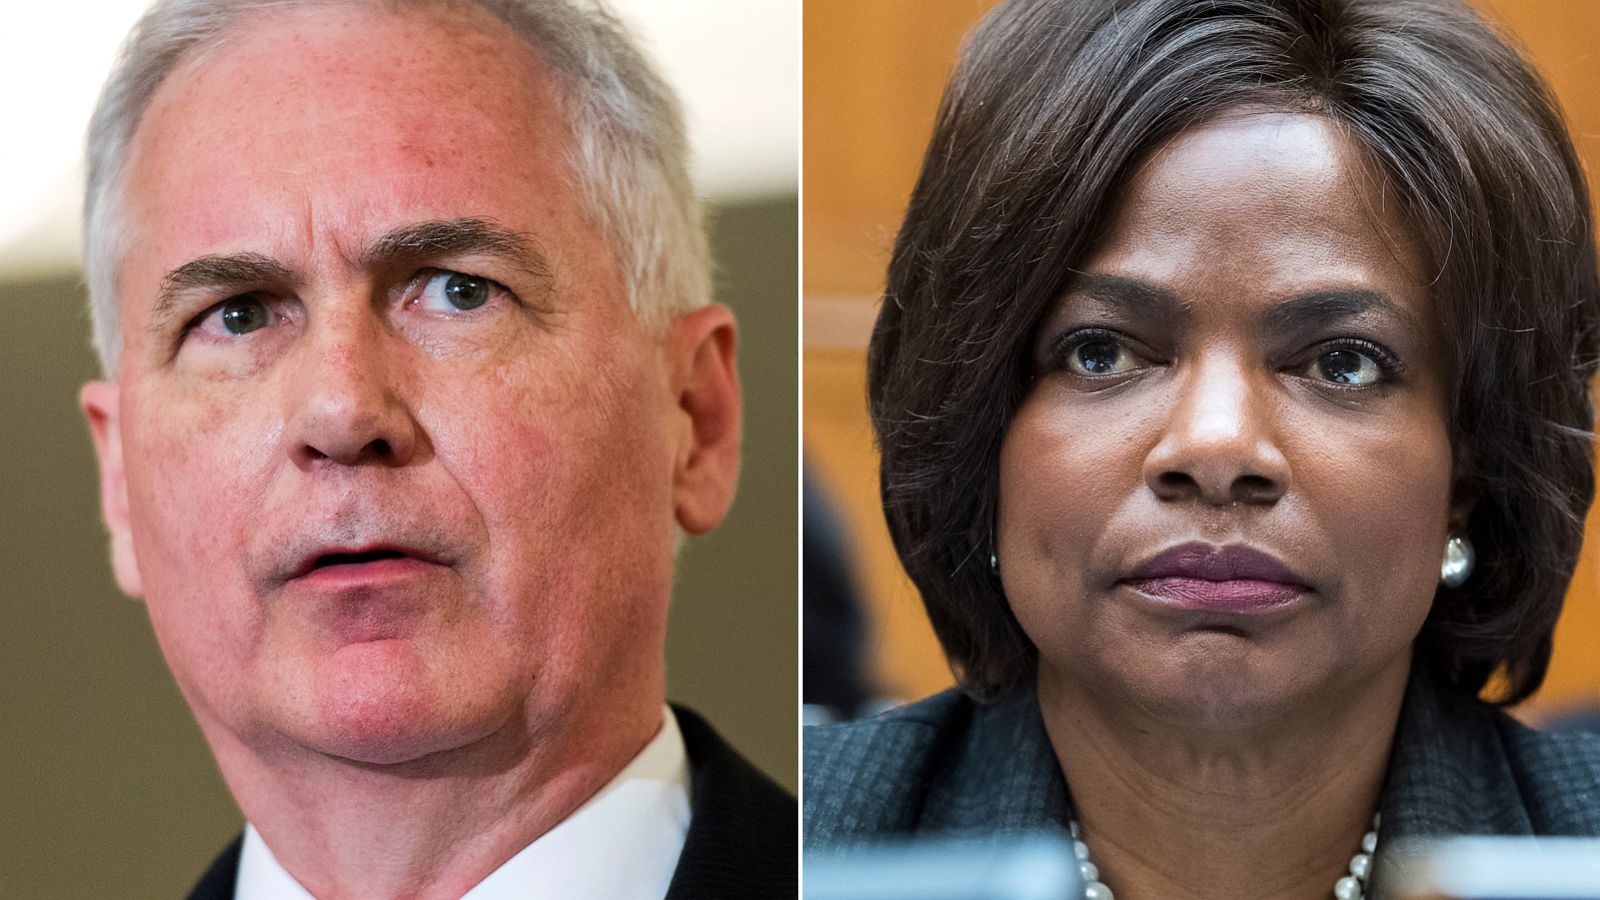 President, lawyers should participate in impeachment hearing Demings, McClintock